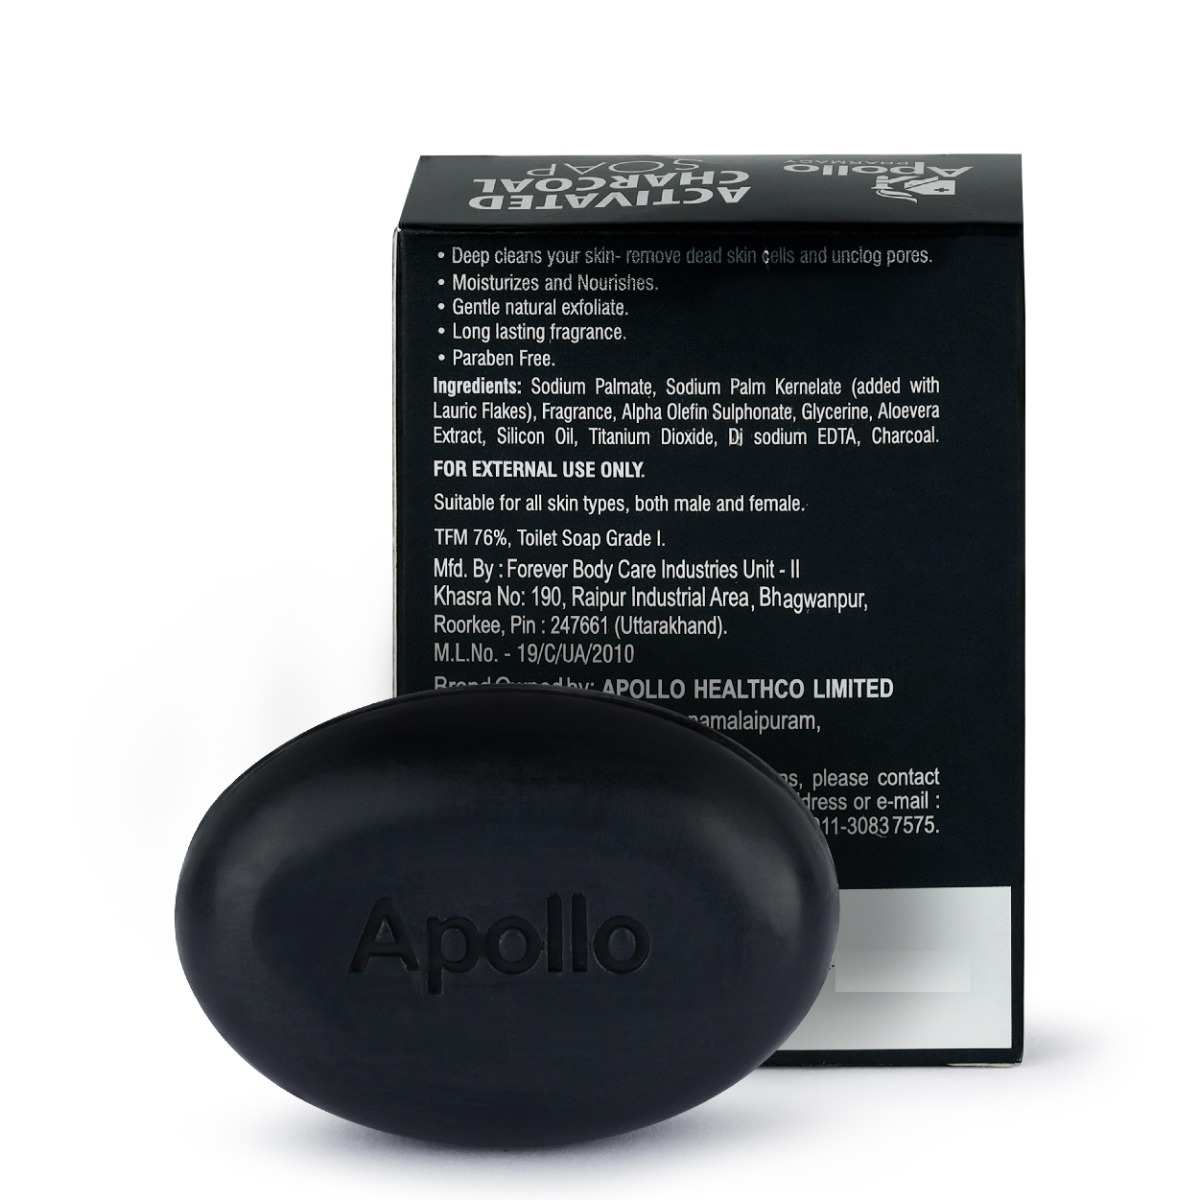 Apollo Pharmacy Activated Charcoal Soap, 250 gm (2x125 gm), Pack of 2 S